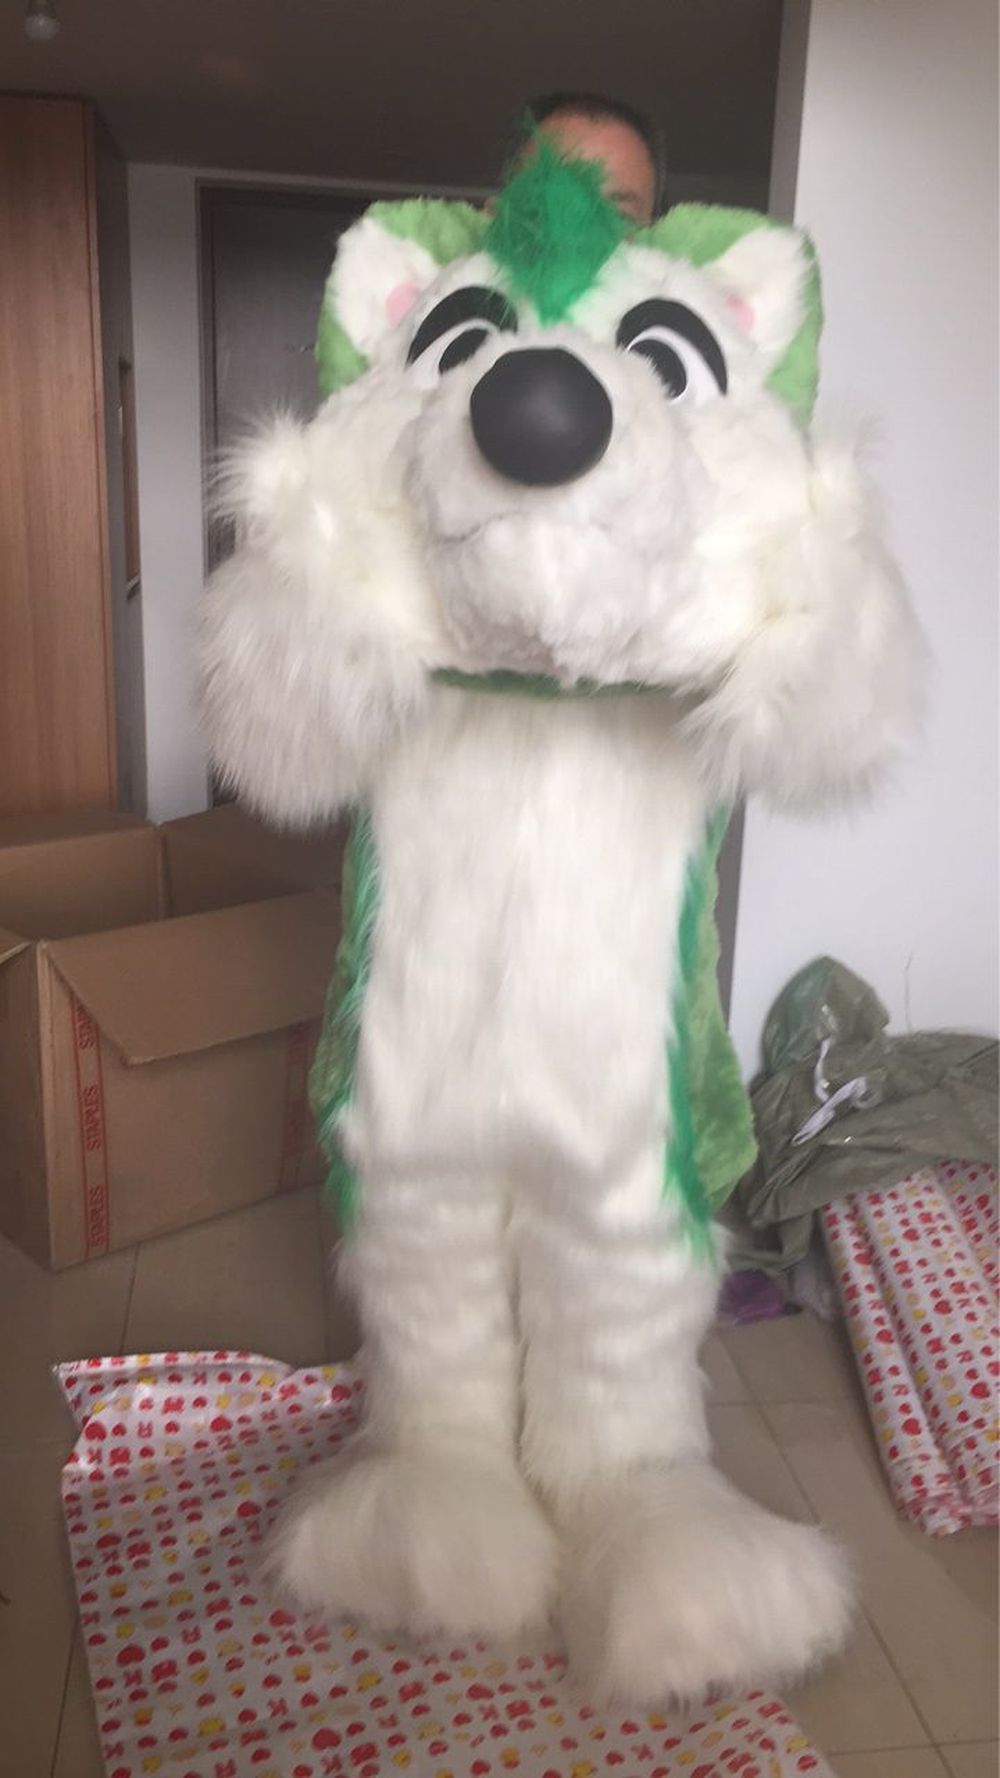 Long Fur Green Husky Dog Mascot Costume Fursuit Cosplay Party Fancy Dress Outfits Advertising Promotion Carnival Halloween Xmas -  by FurryMascot - 